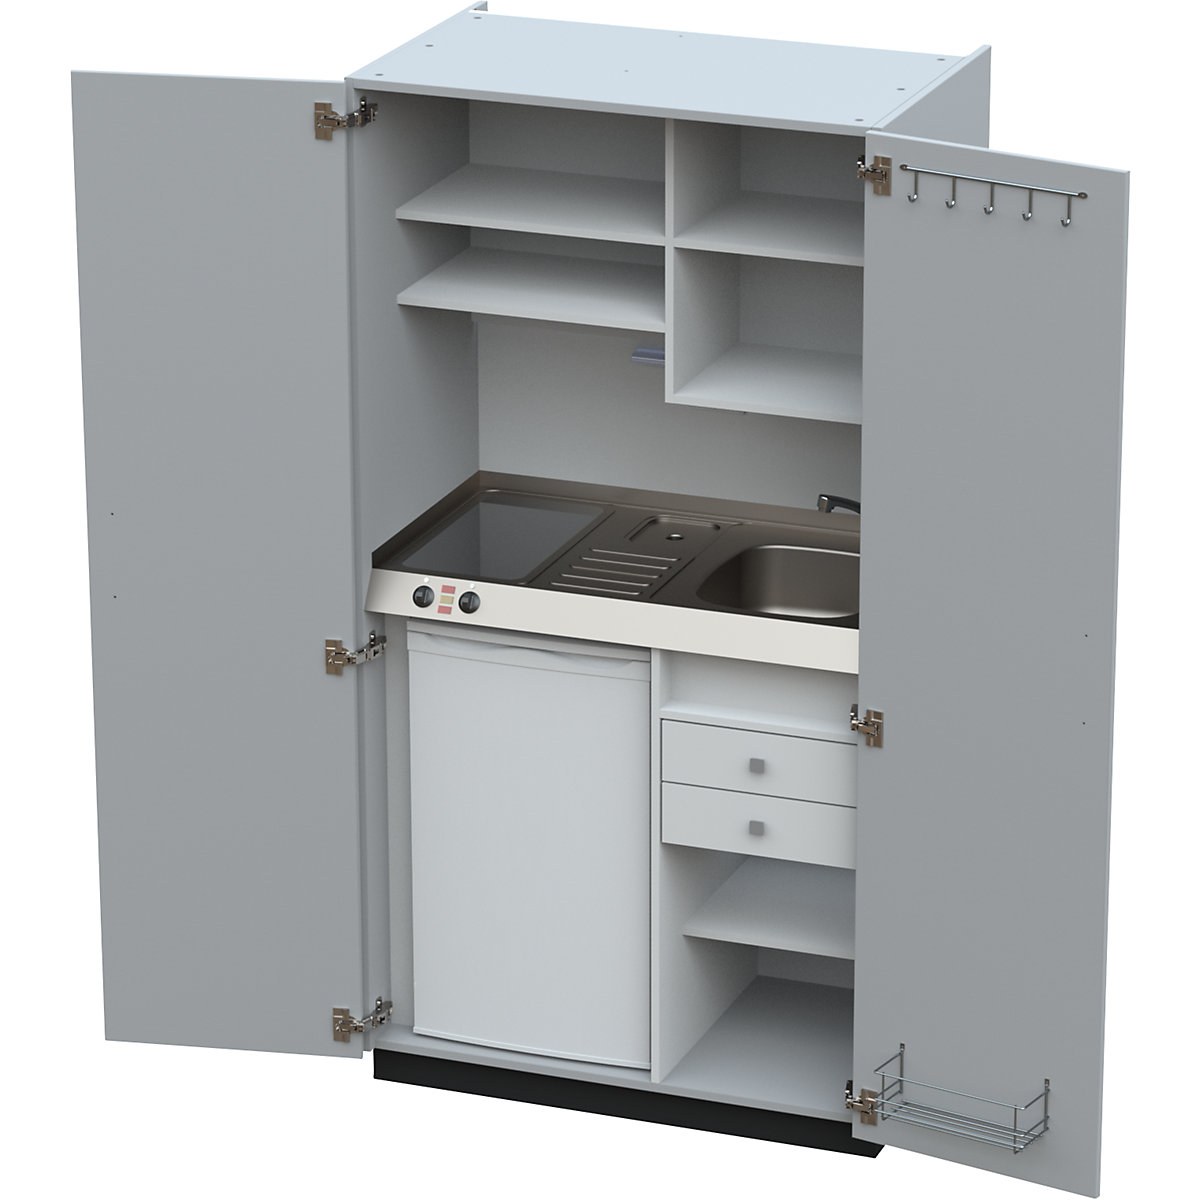 Kitchen unit with hinged doors, 2 glass ceramic hotplates, basin at right, grey, 1956 x 1000 x 650 mm-7